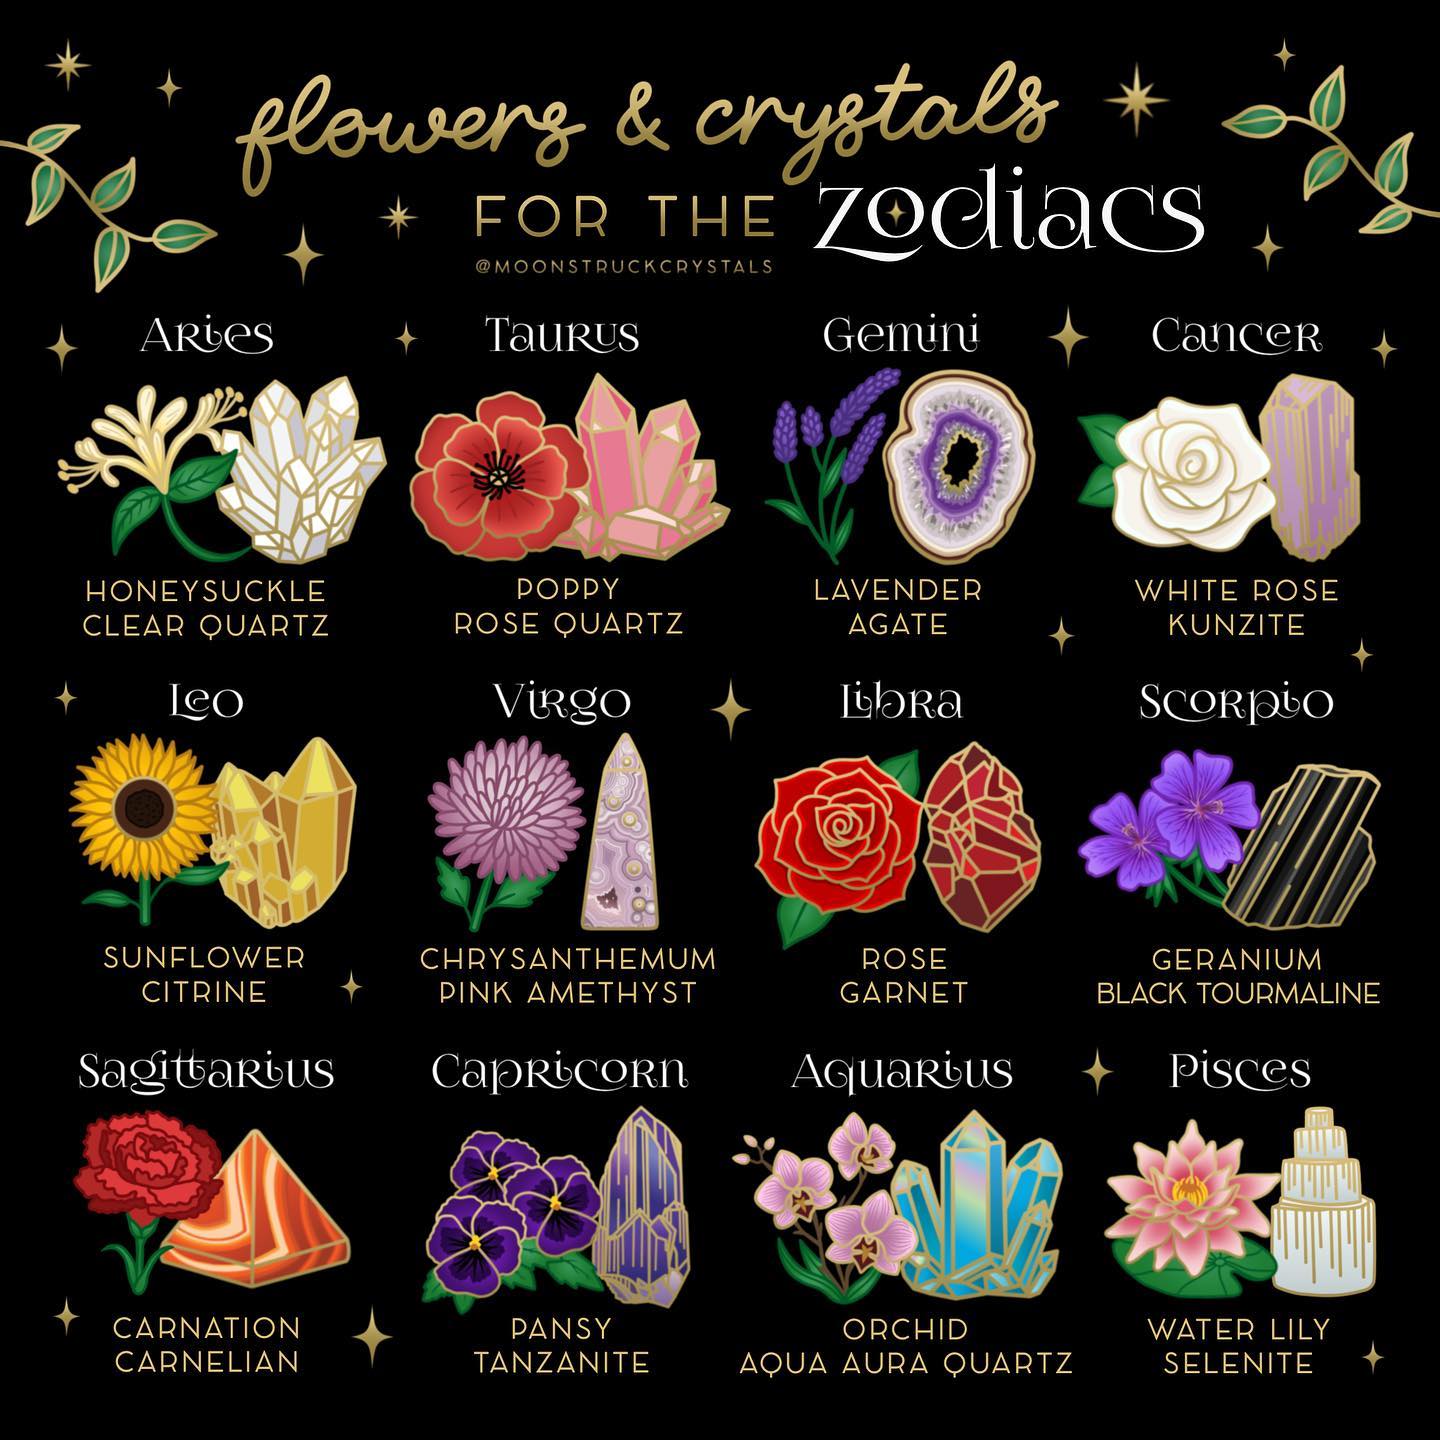 Zodiac Flowers and crystals